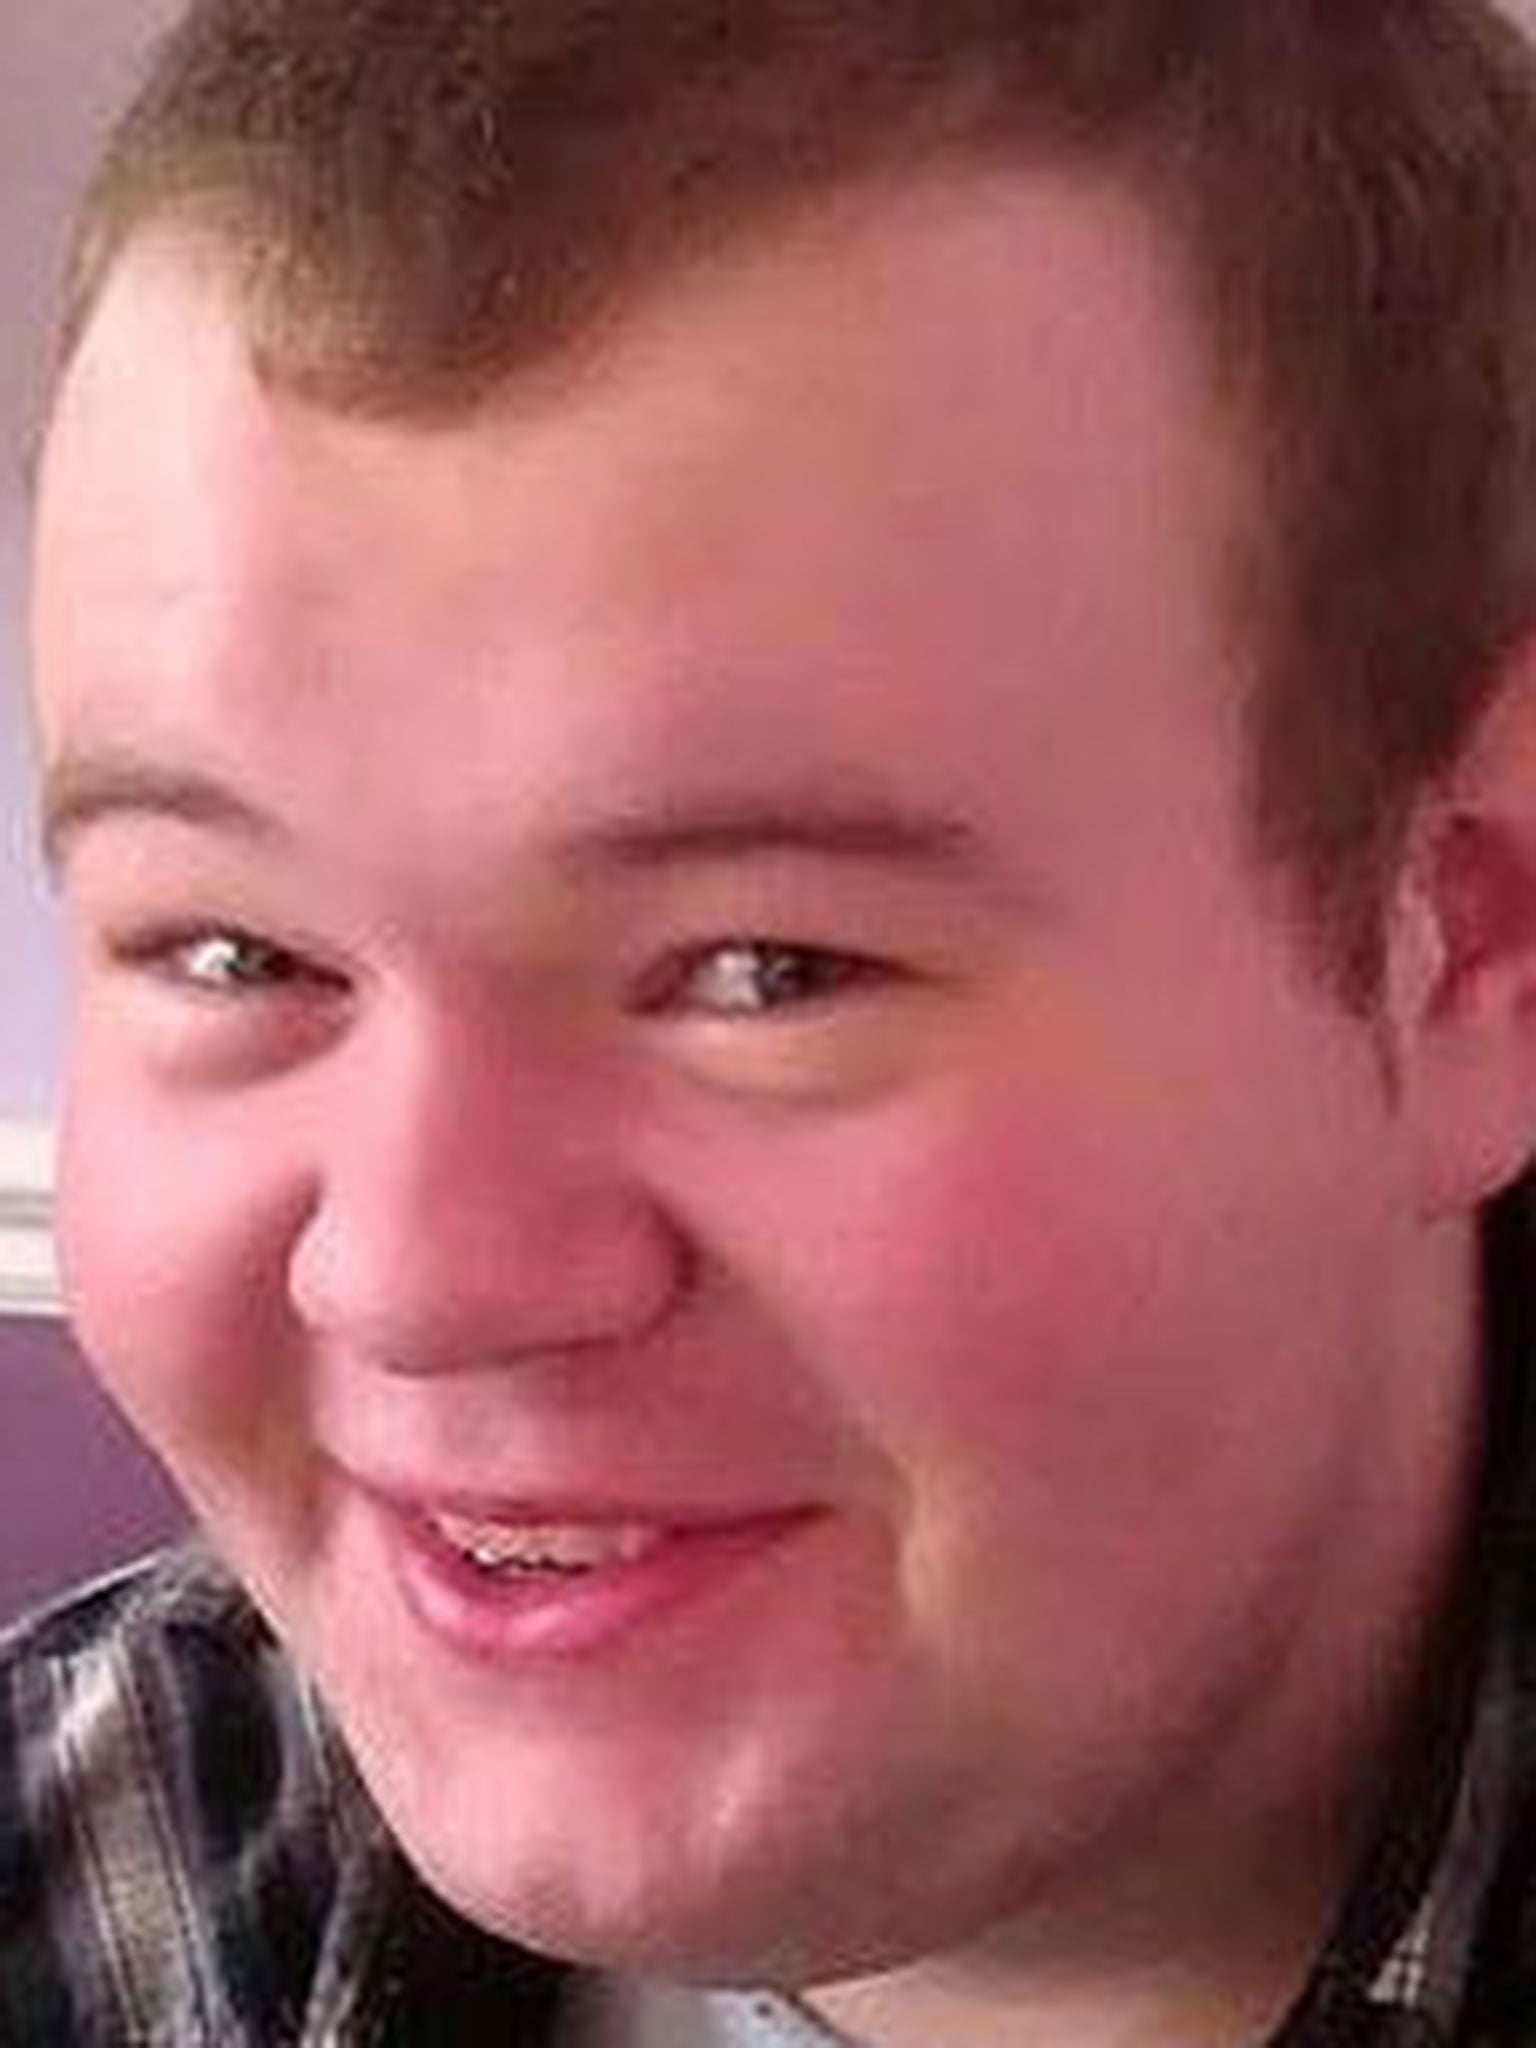 Swansea University physics undergraduate Courtney Mitchell Lewis died after taking 17 tablets at his flat in Swansea